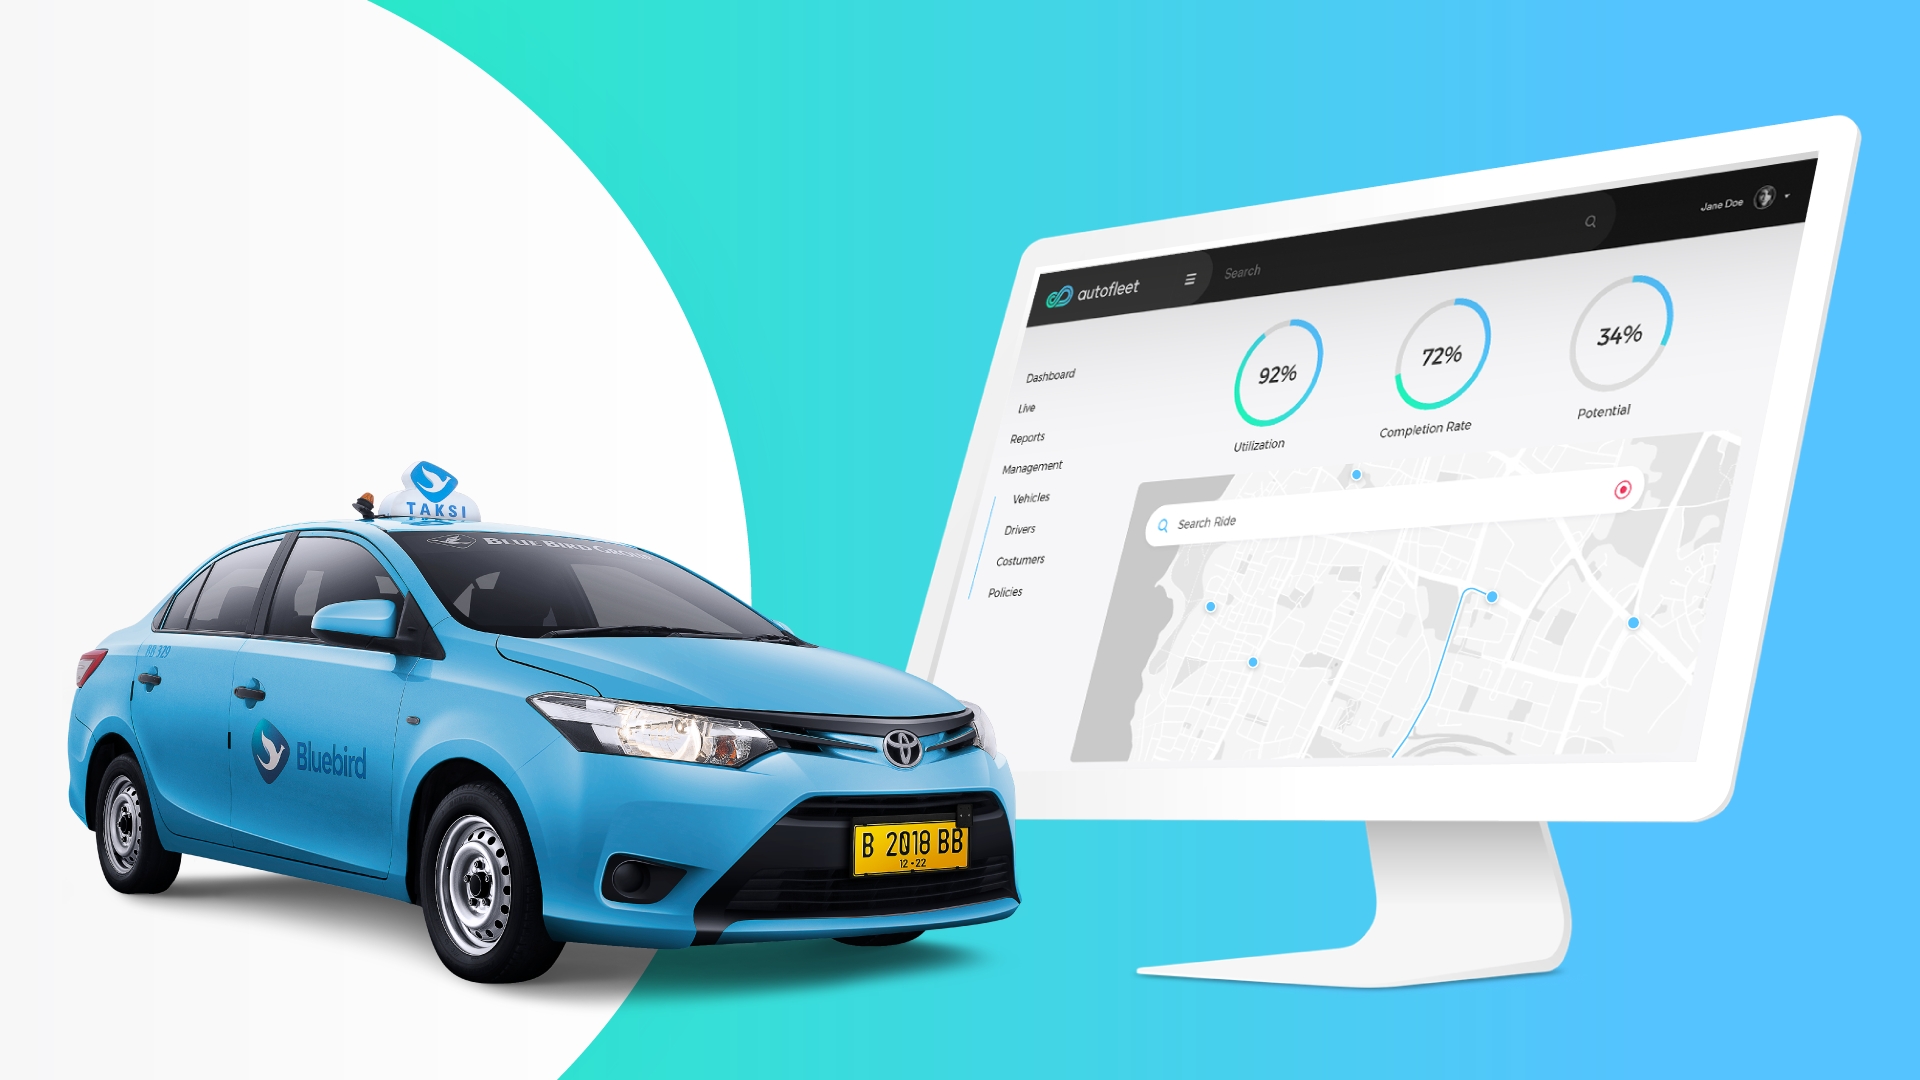 Bluebird Partners With Autofleet and ABeam to Optimize and Scale One of Asia's Largest Taxi Fleets | Business Wire